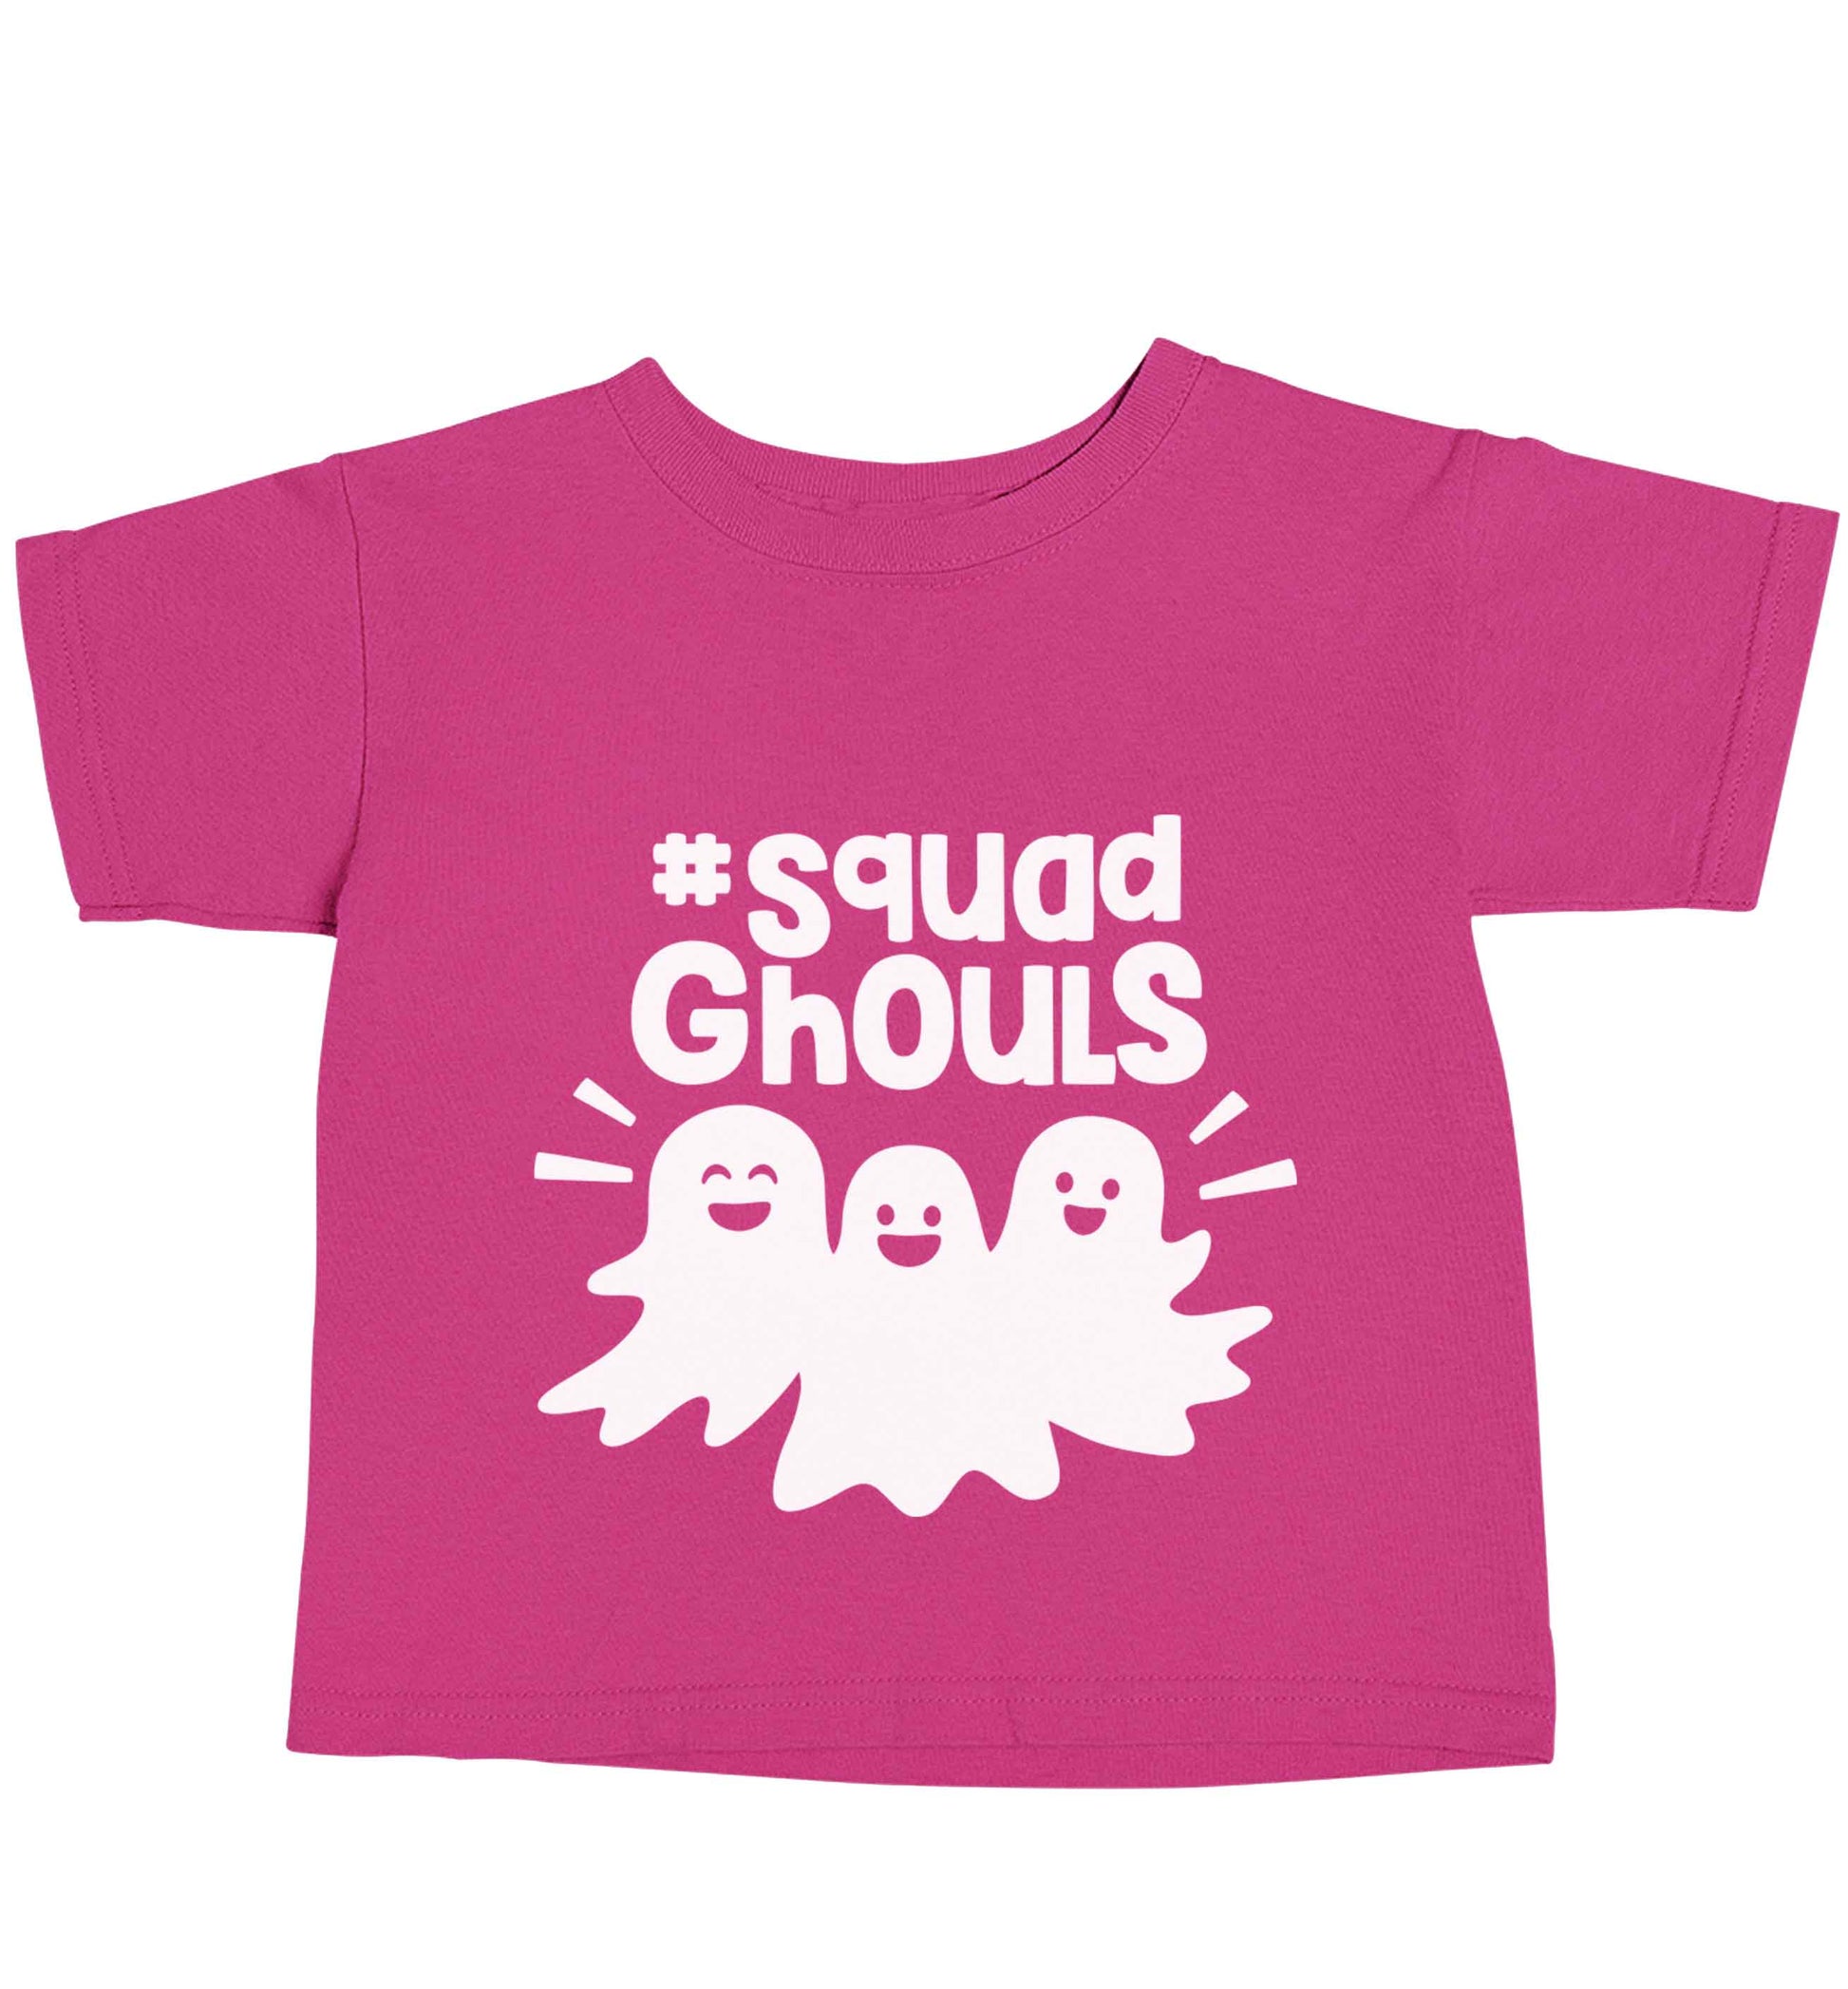 Squad ghouls Kit pink baby toddler Tshirt 2 Years